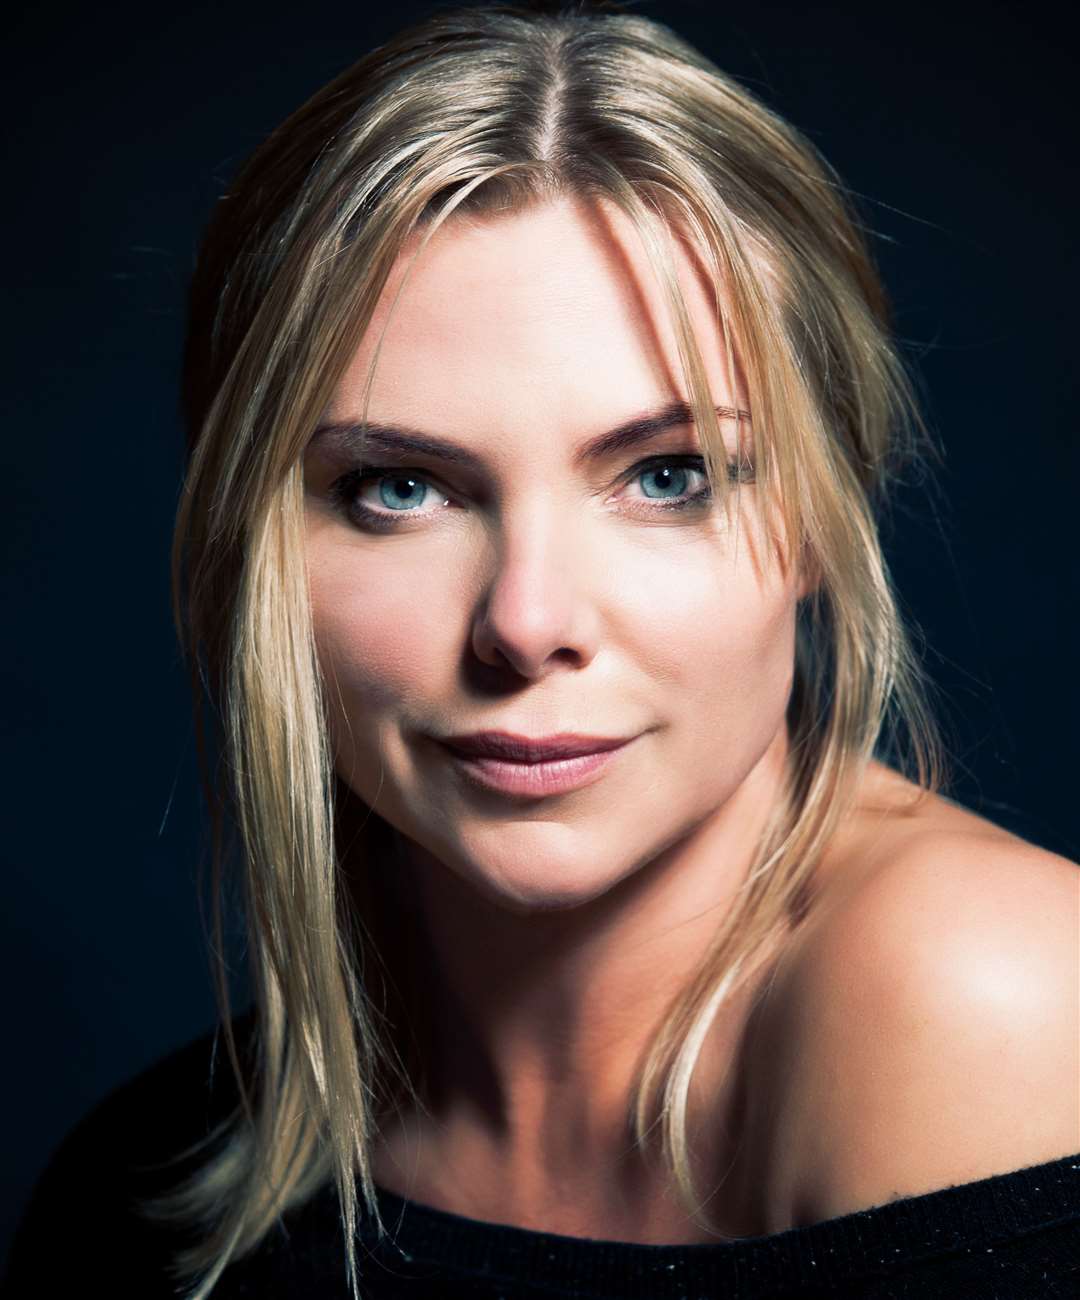 Samantha Womack stars in The Girl on the Train